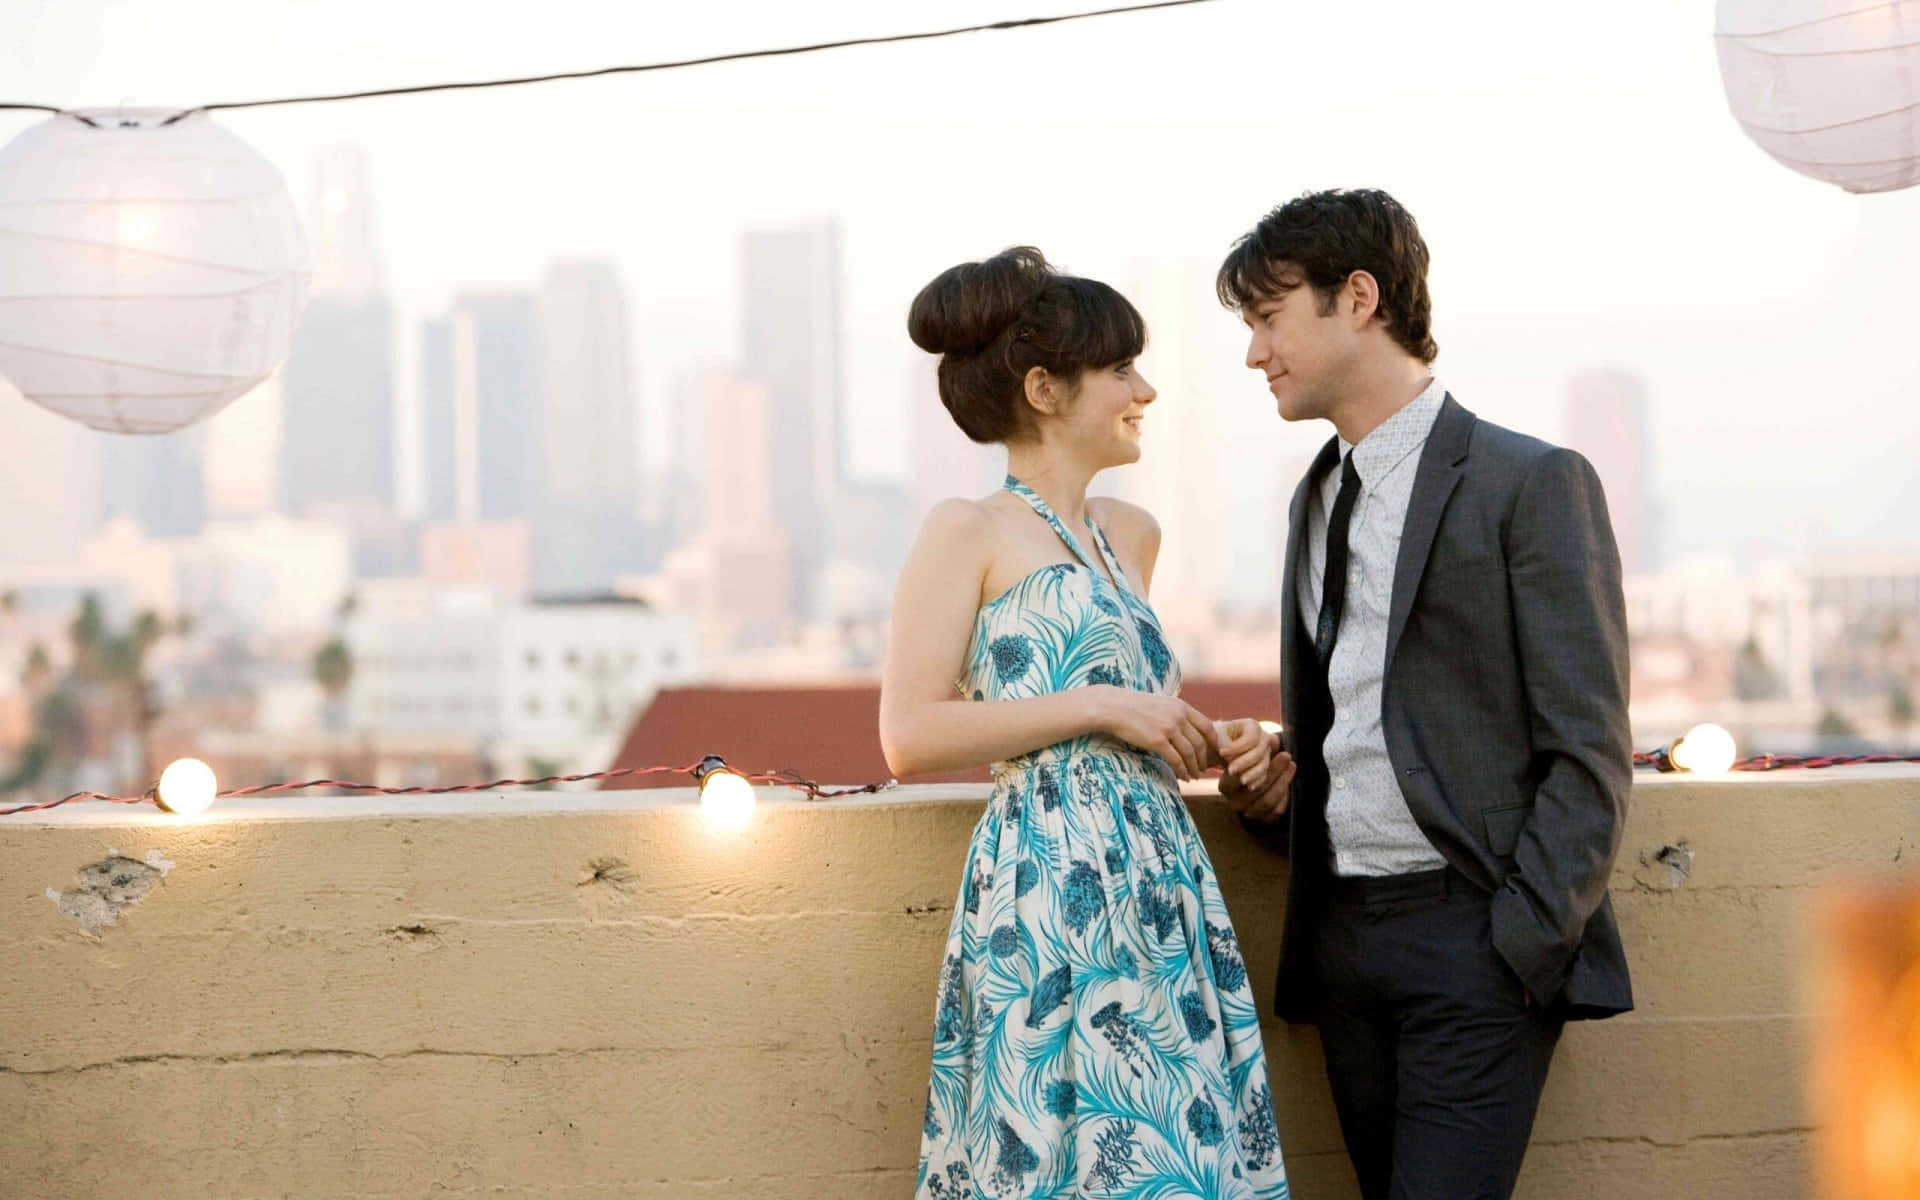 500 Days Of Summer - falling in love one day at a time